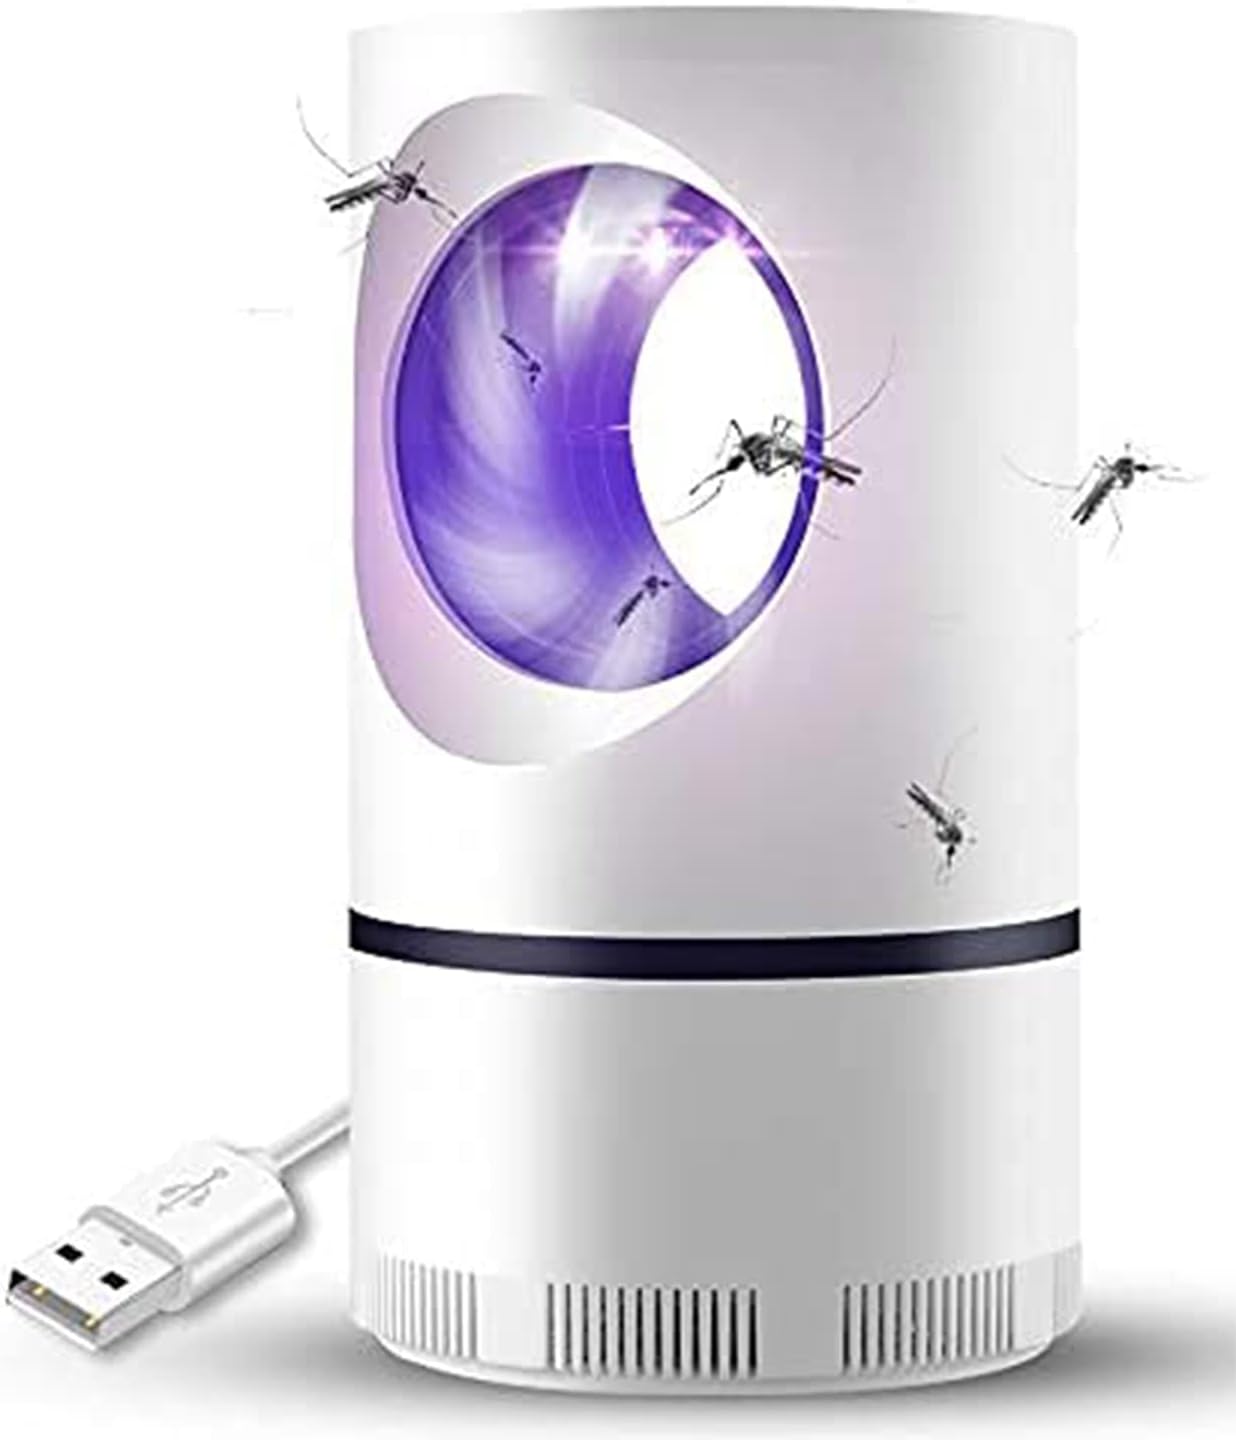 ckyuna Mosquito Killer Lamp Electric Trap Light Insect [...]